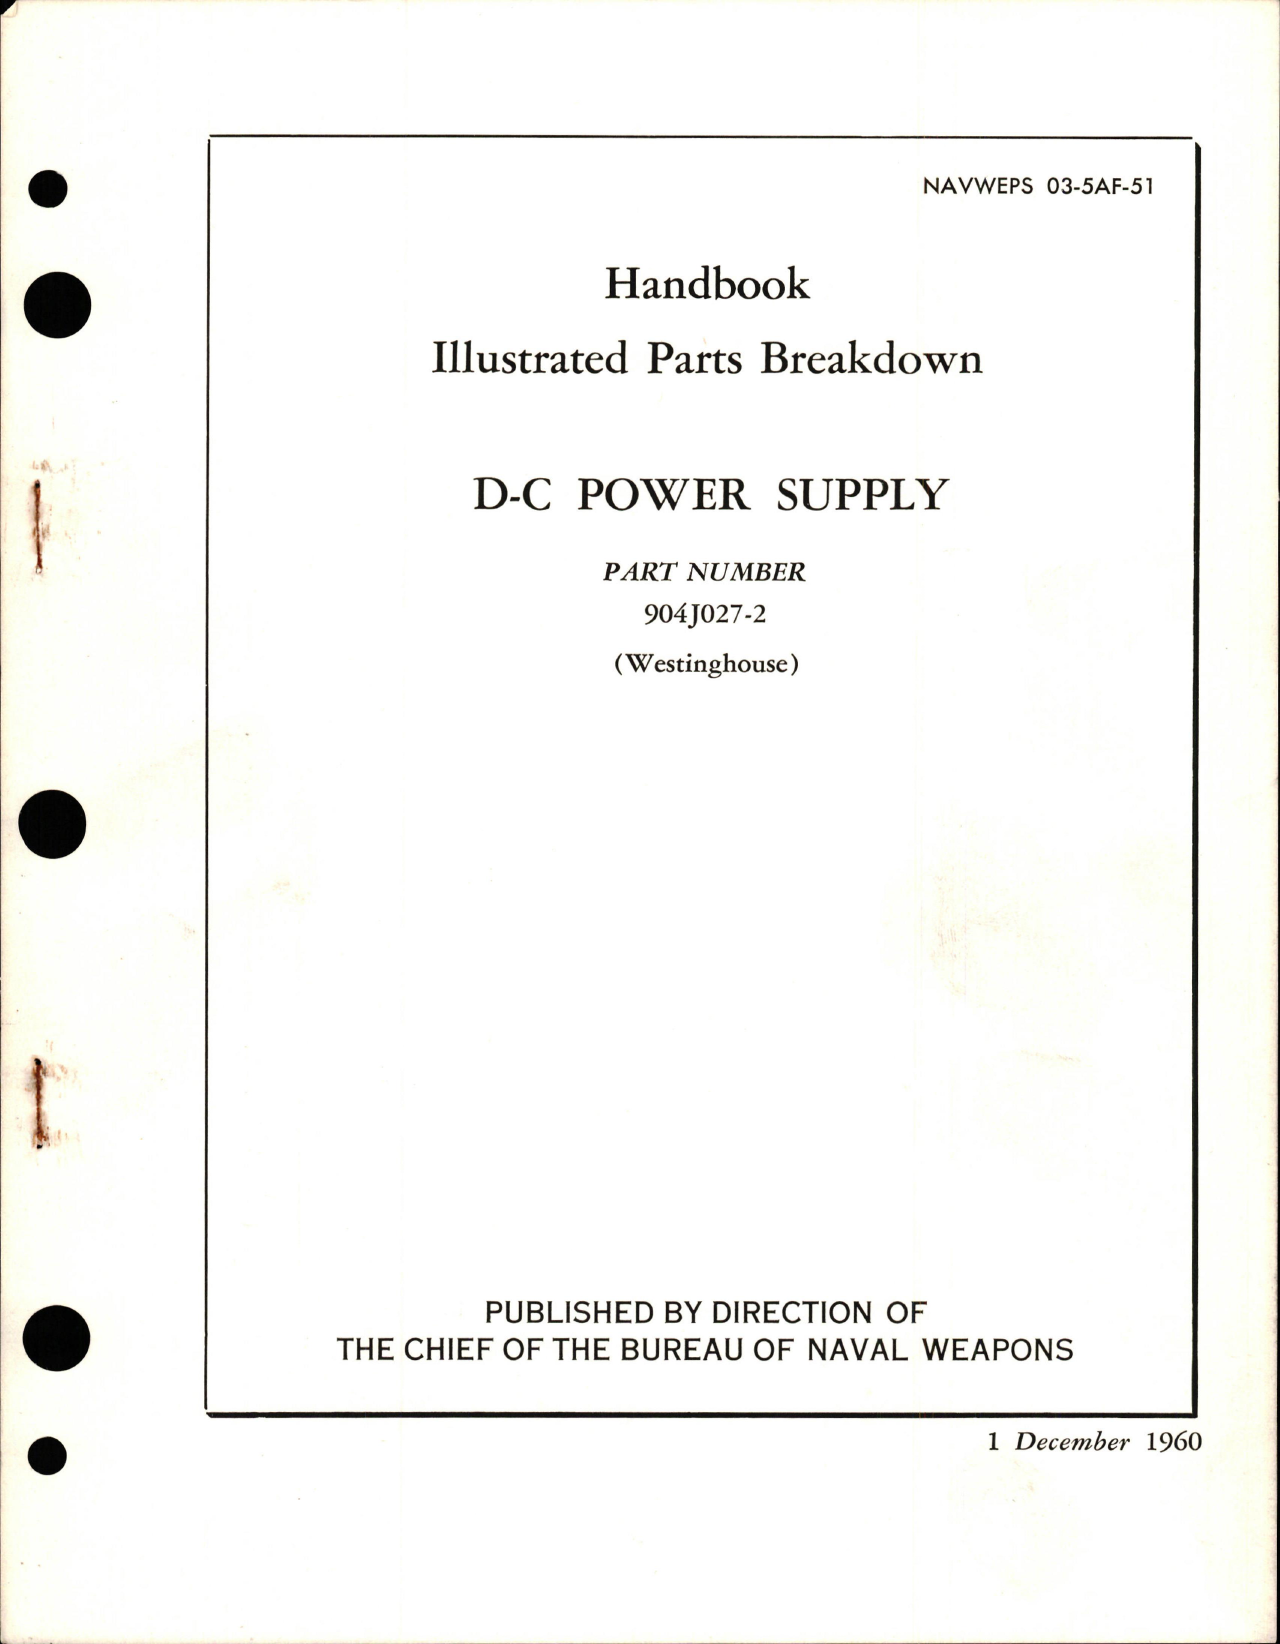 Sample page 1 from AirCorps Library document: Illustrated Parts Breakdown for D-C Power Supply - Part 904J027-2 